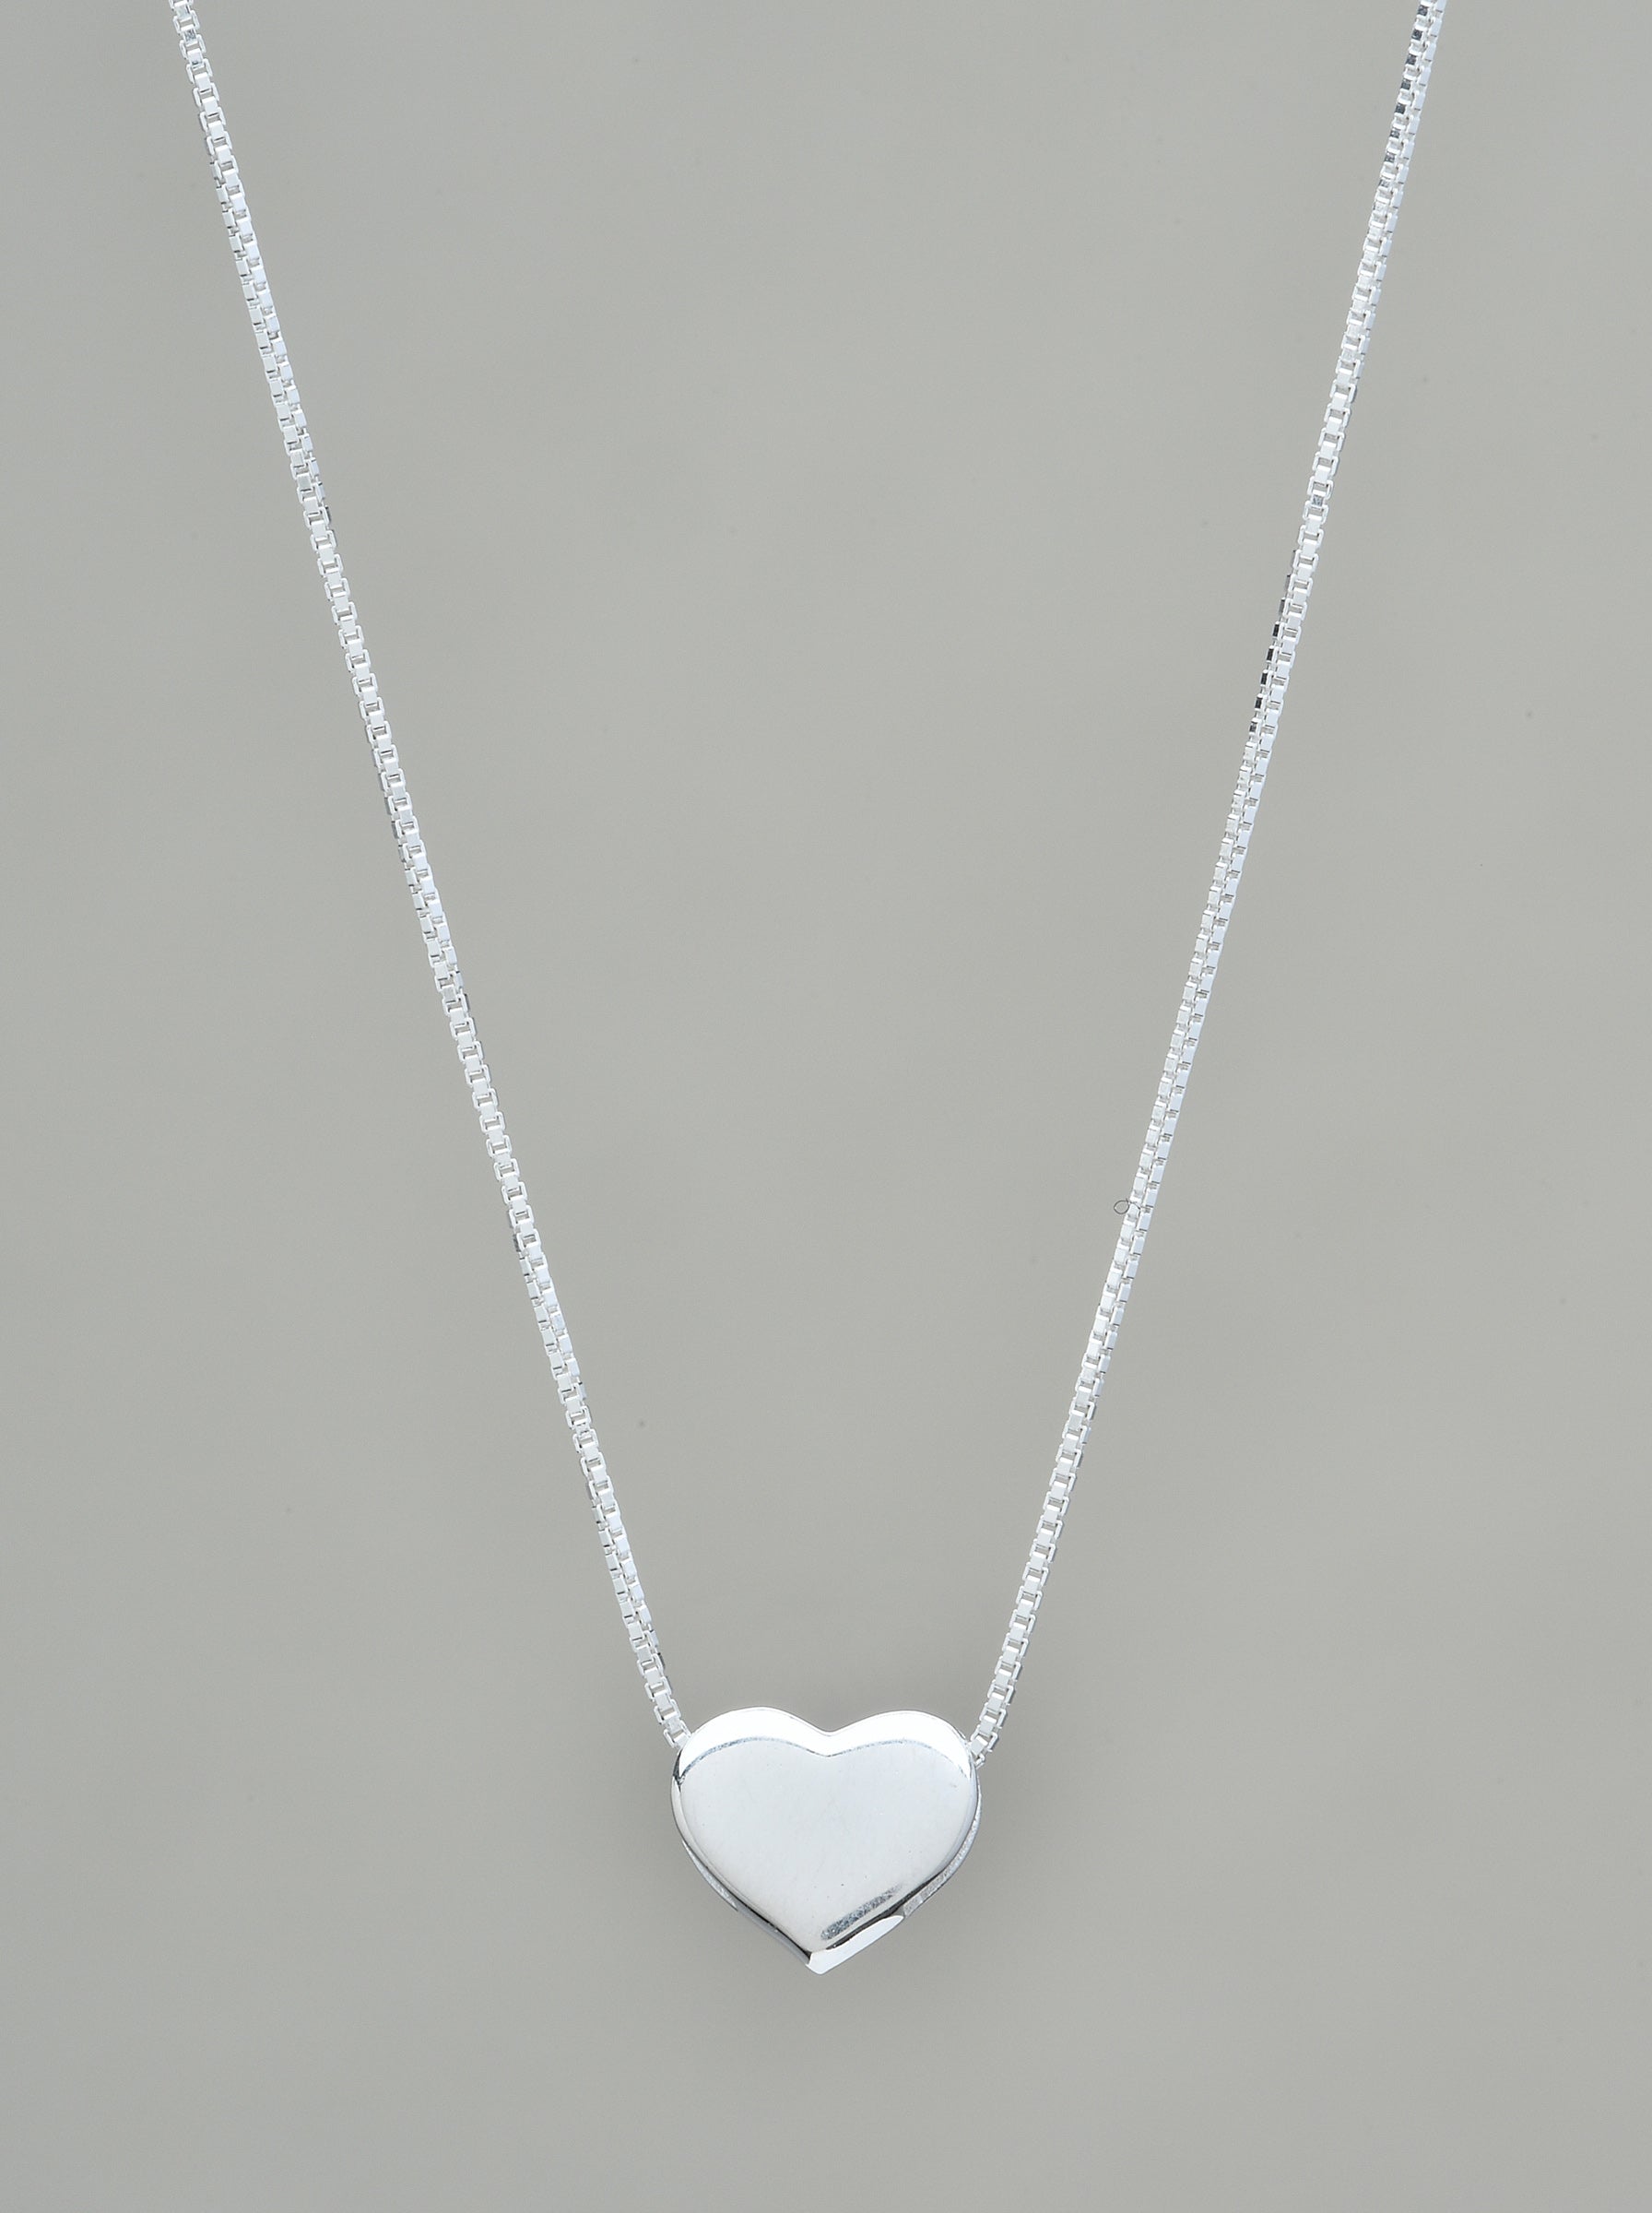 Heart Necklace Sterling Silver (Large)